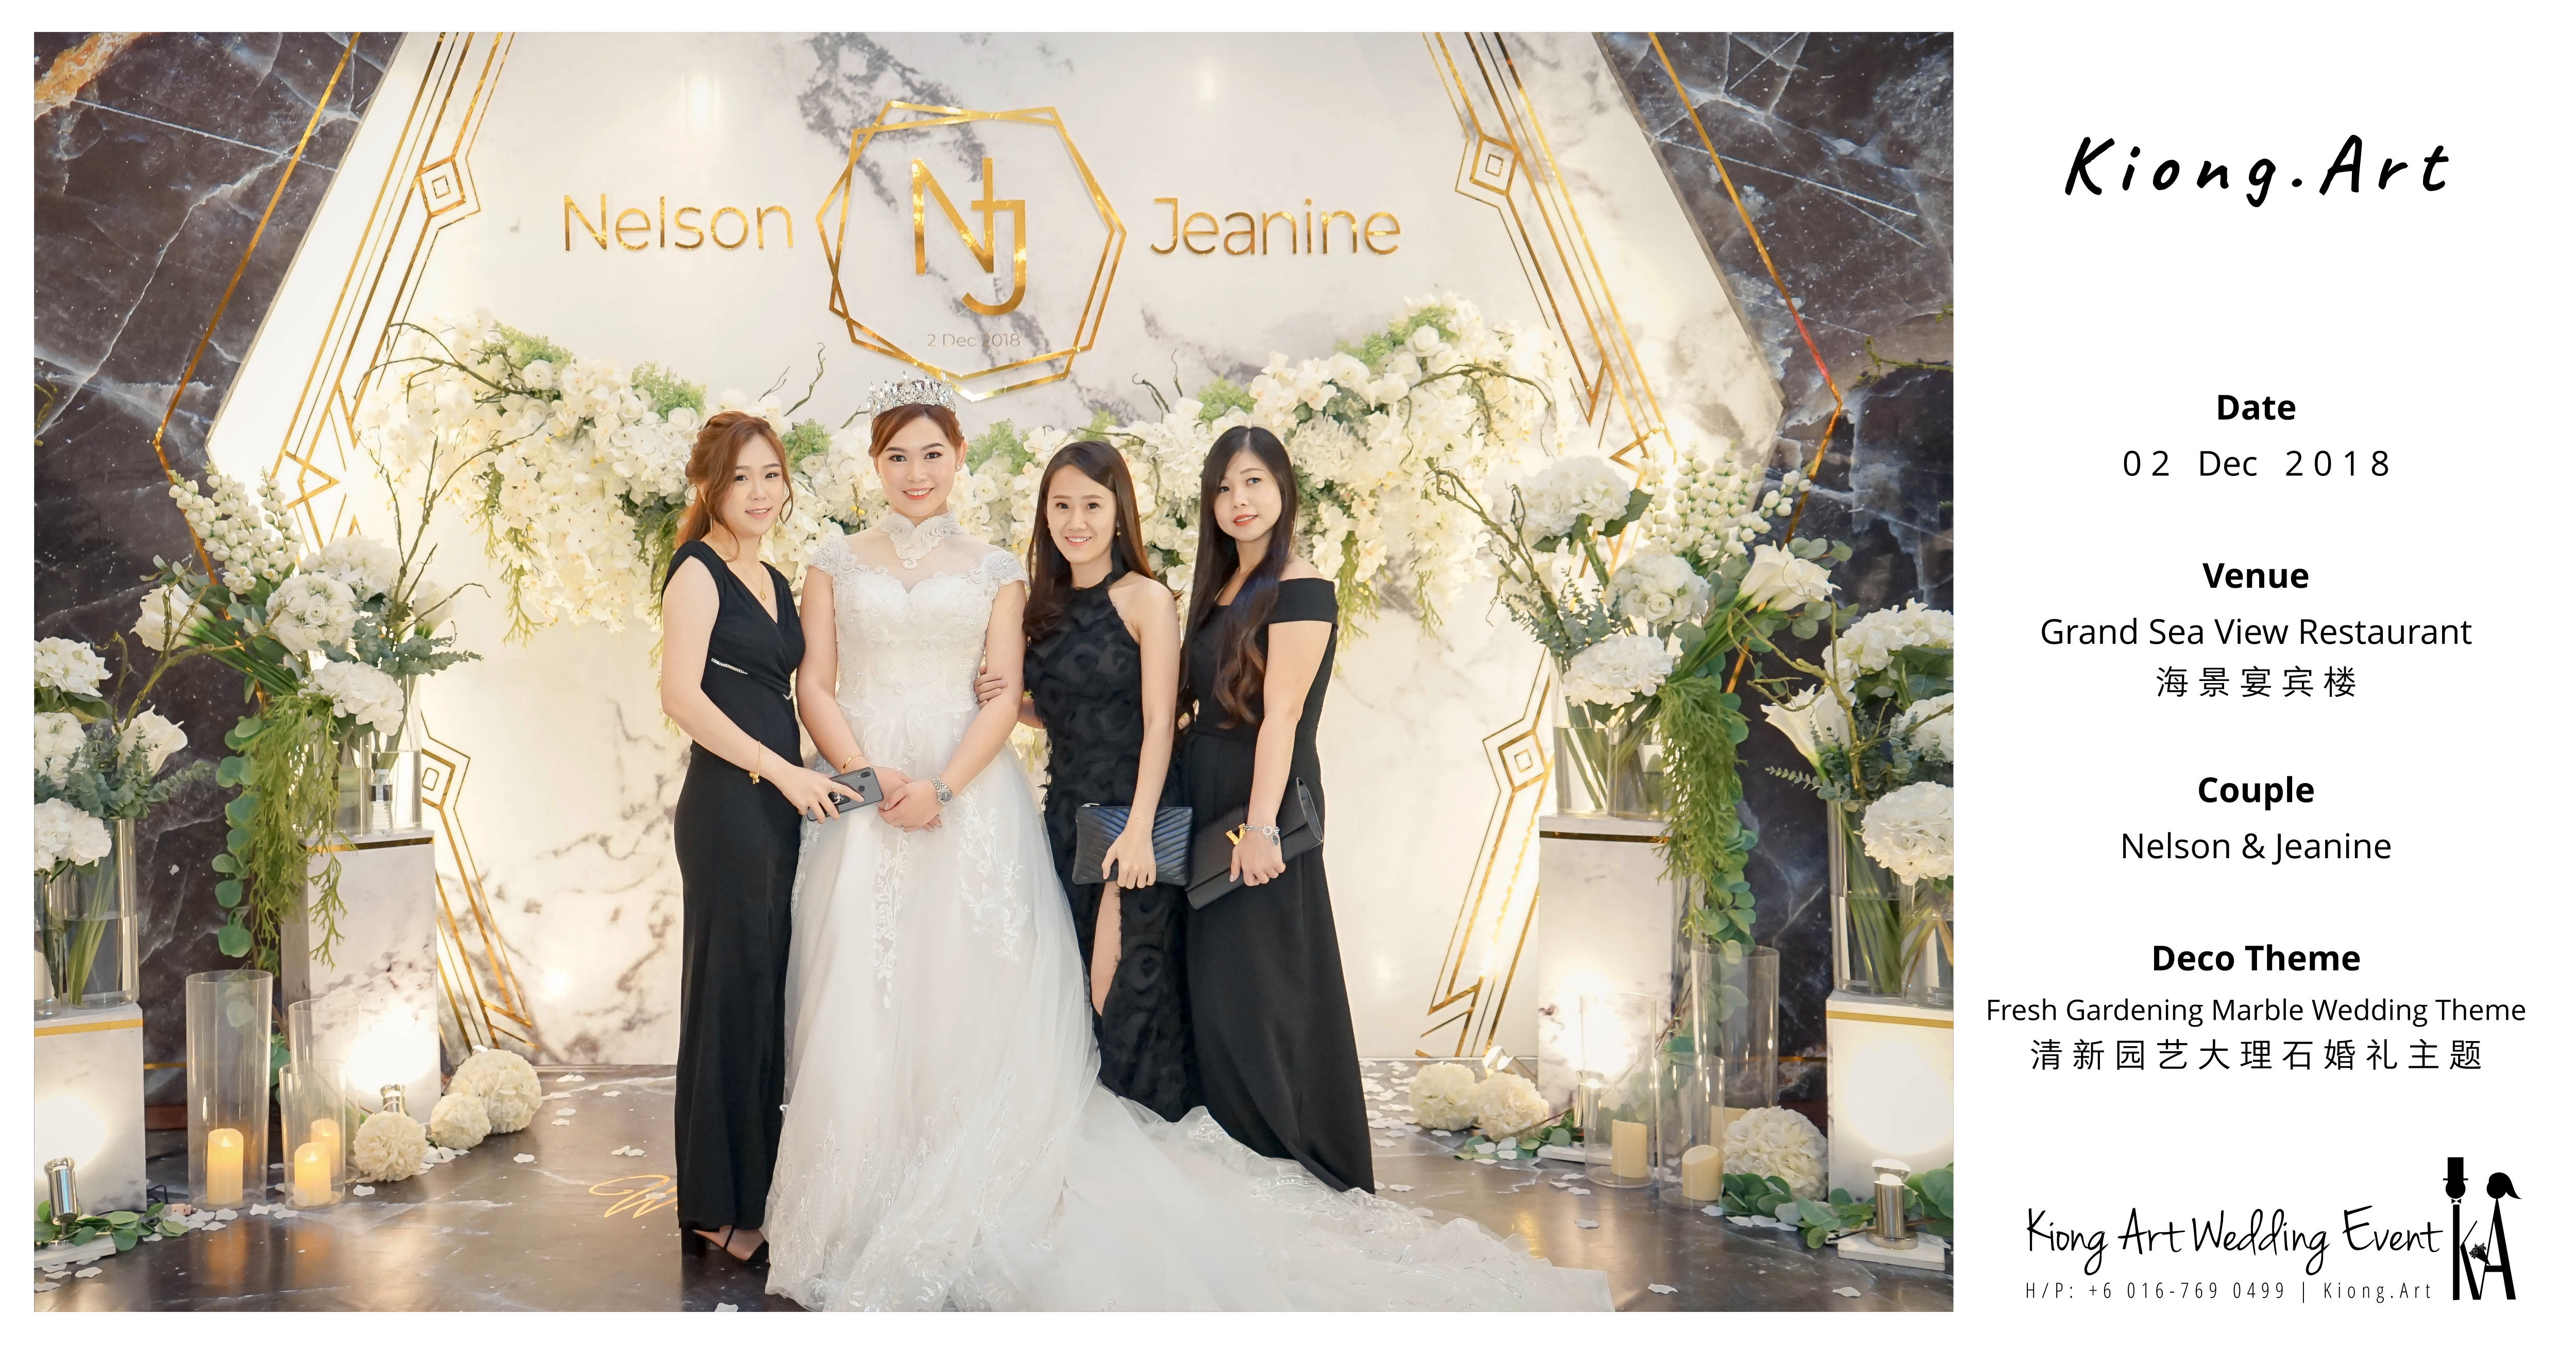 Malaysia Kuala Lumpur Wedding Event Kiong Art Wedding Deco Decoration One-stop Wedding Planning of Nelson and Jeanine Wedding at Grand Sea View Restaurant A11-A00-04